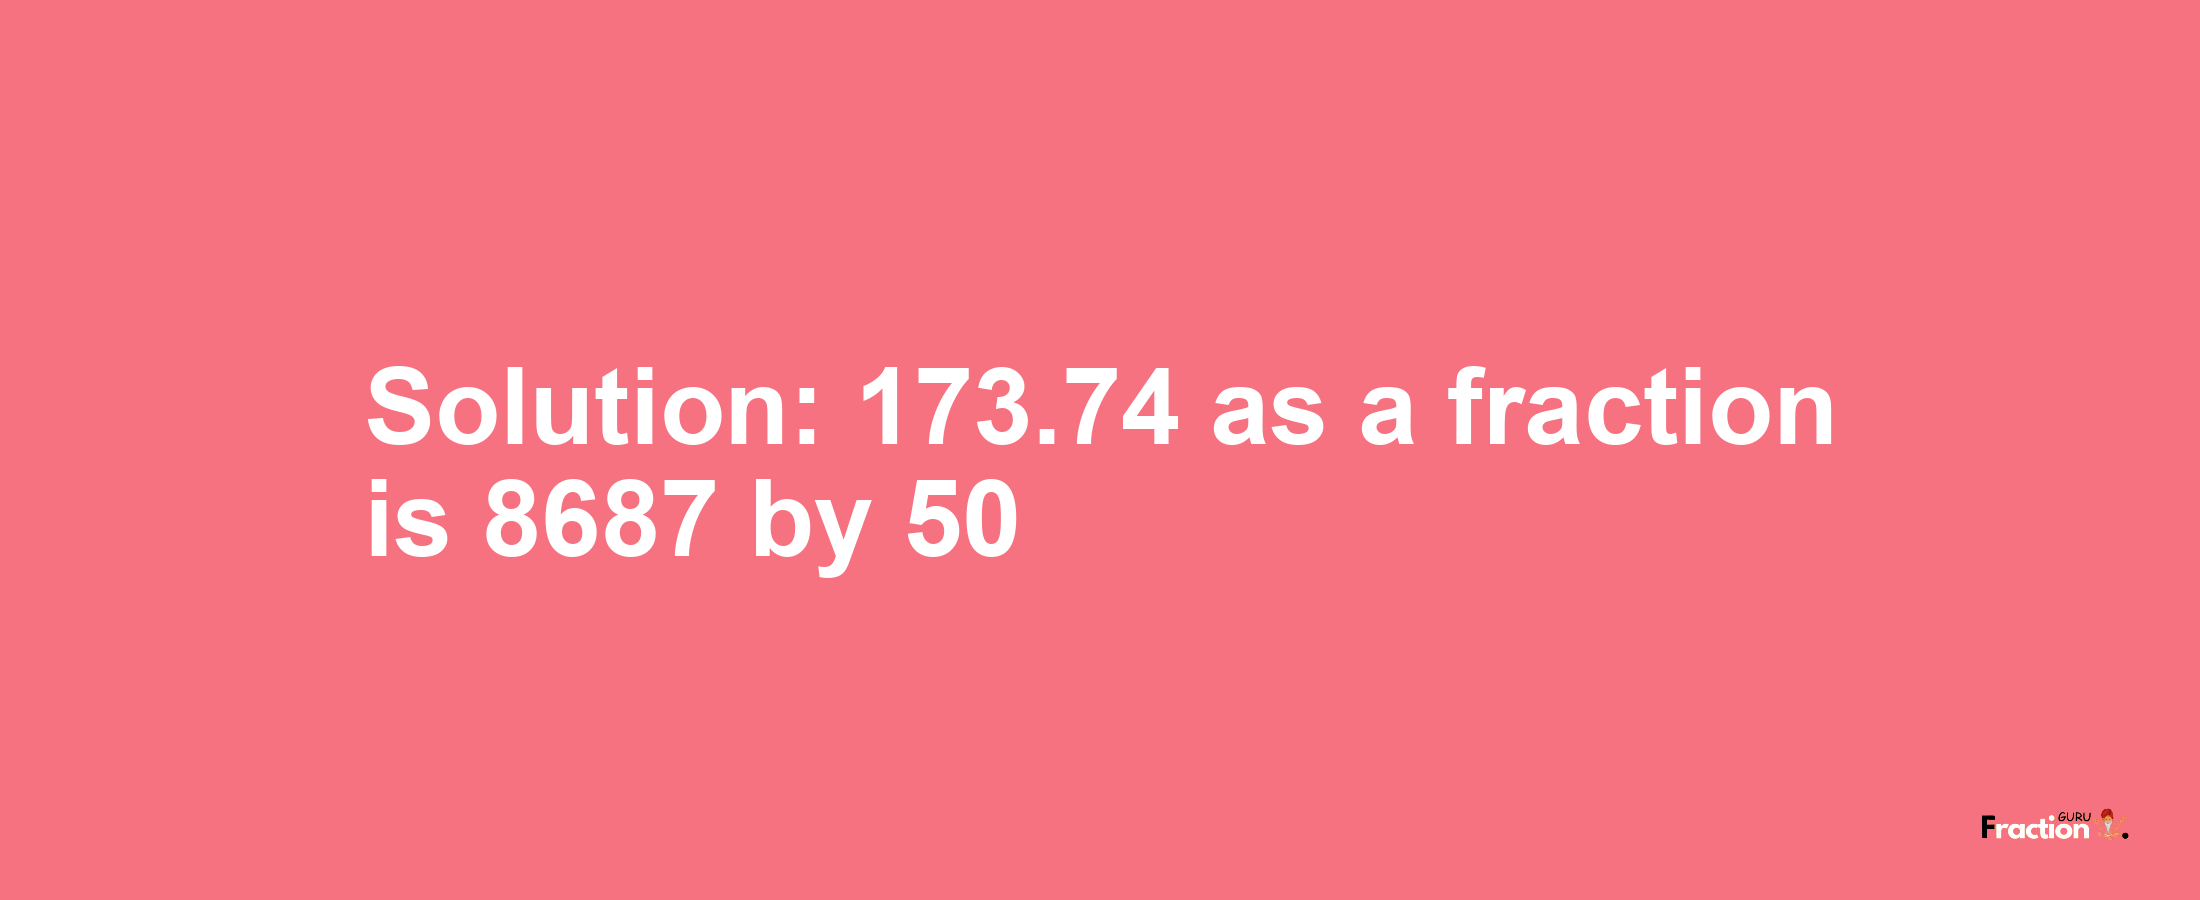 Solution:173.74 as a fraction is 8687/50